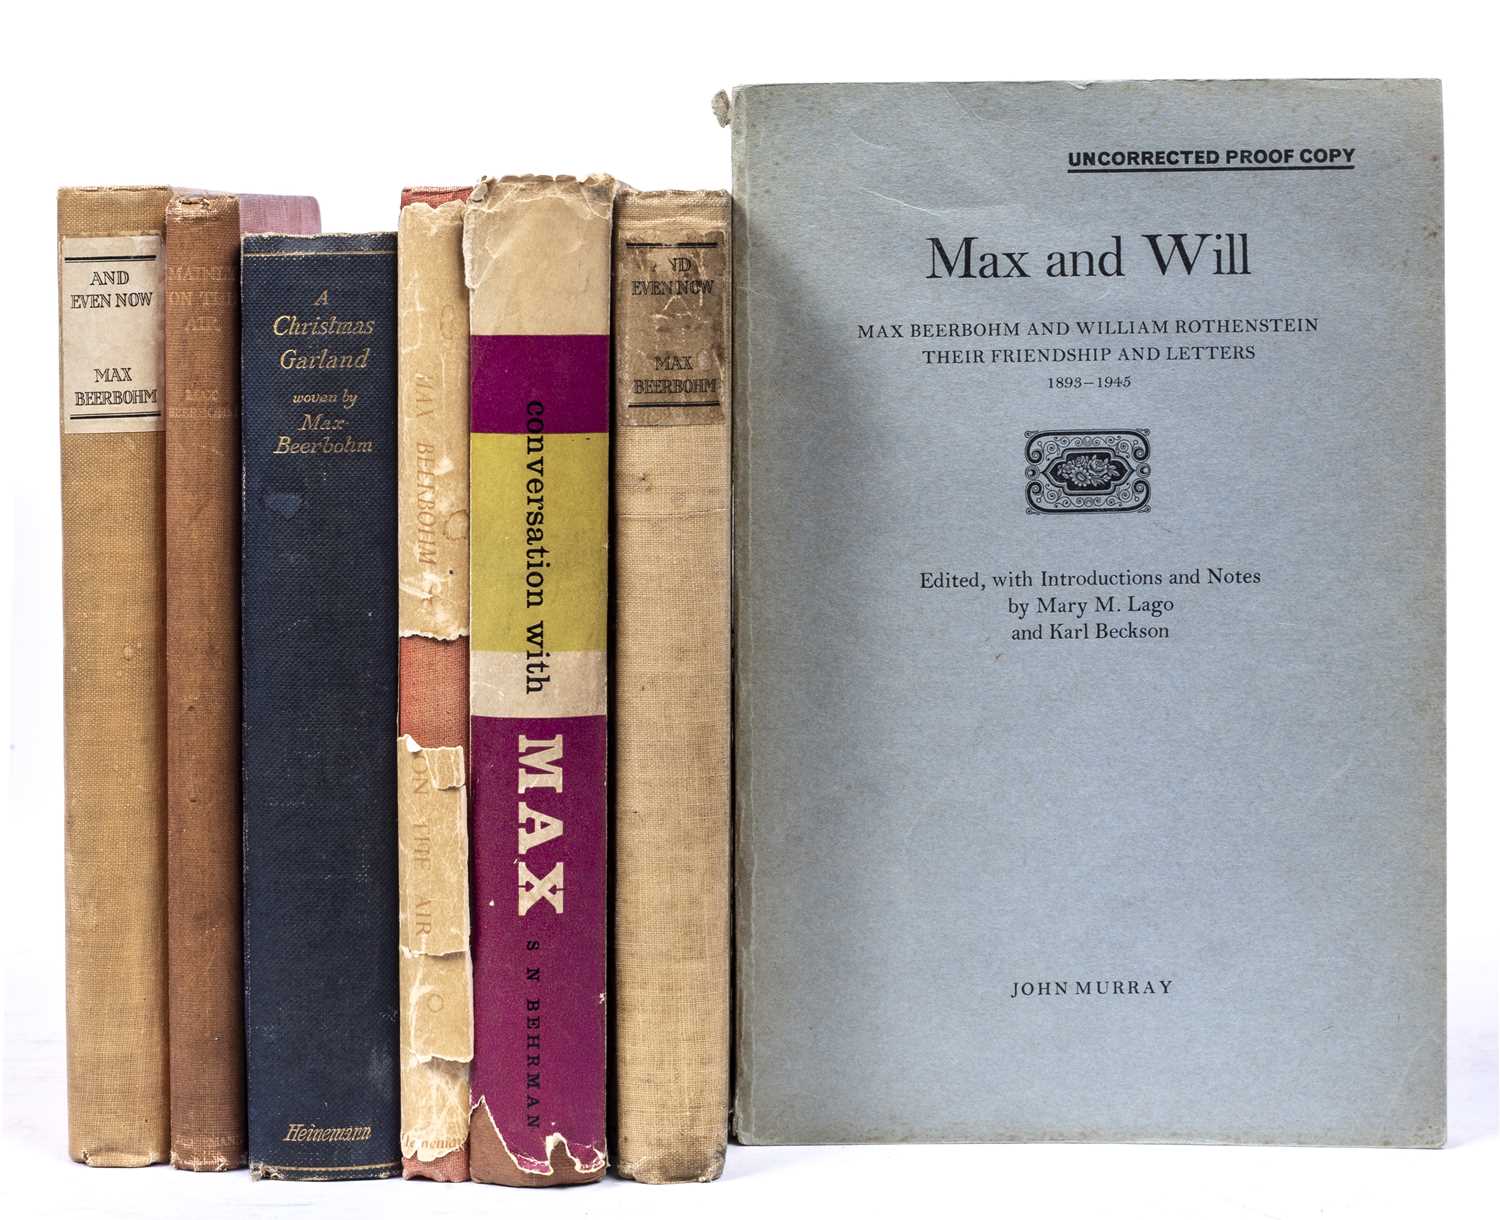 Beerbohm, (Max) and Rothenstein, (William). 'Max and Will', Their Friendship and Letters 1893-